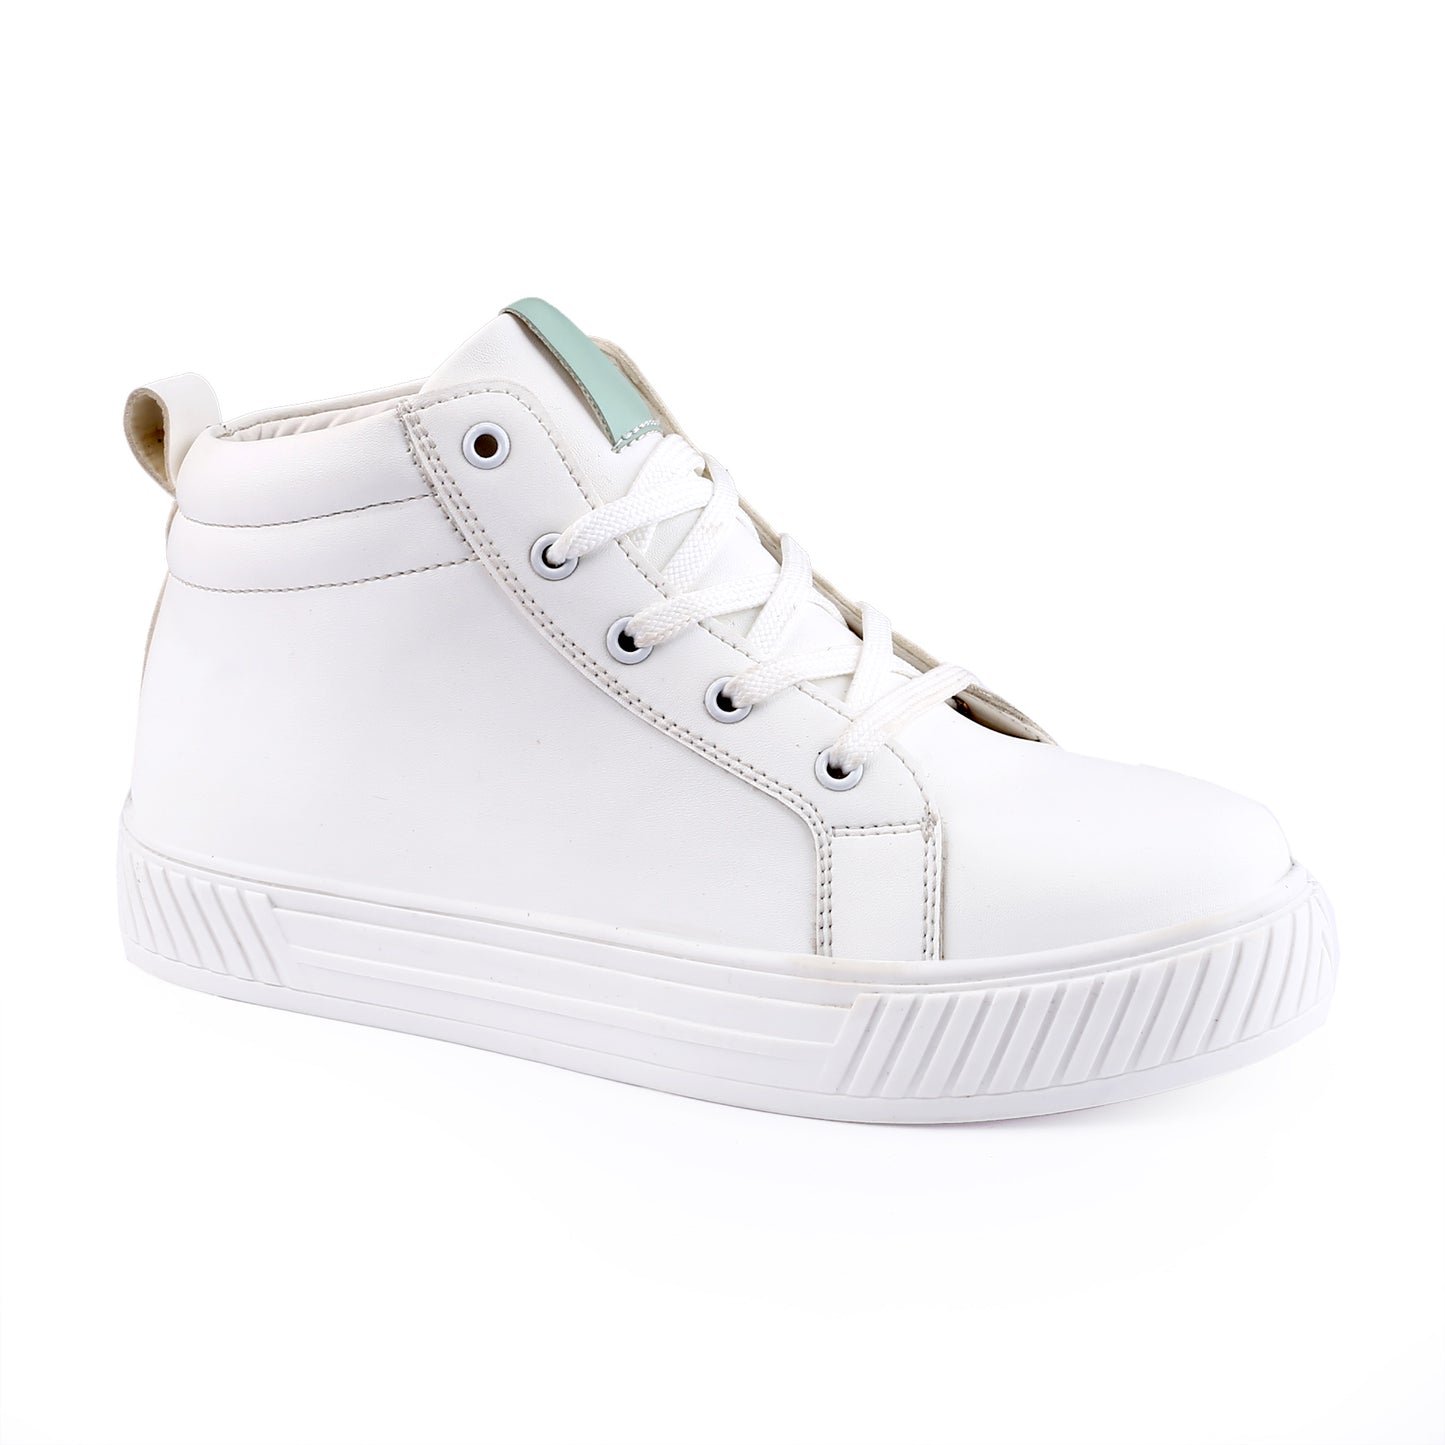 Women's New Stylish Casual Sneaker Lace up, Shoes